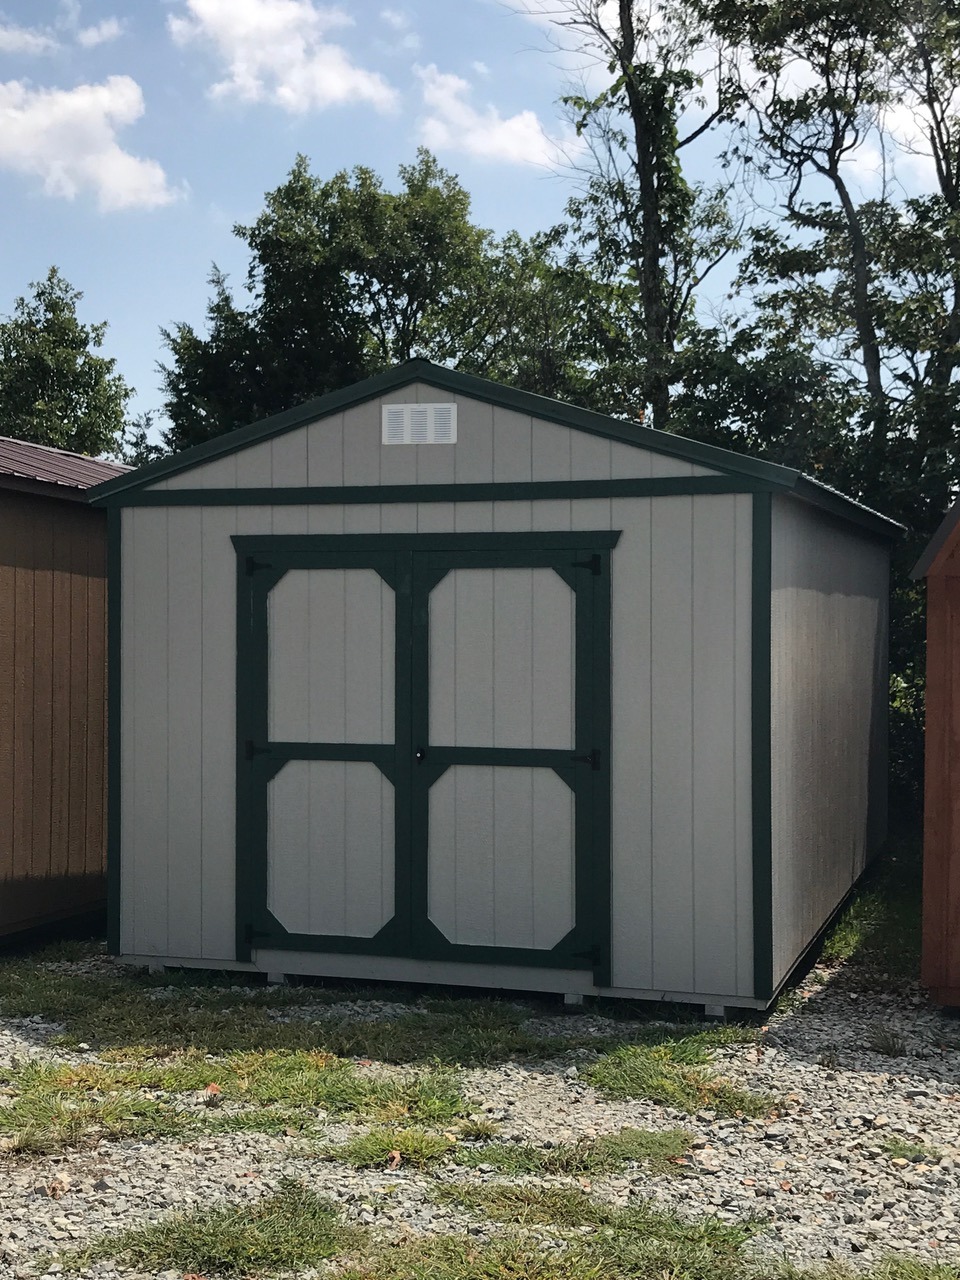 Tan painted express series utility shed with black trim